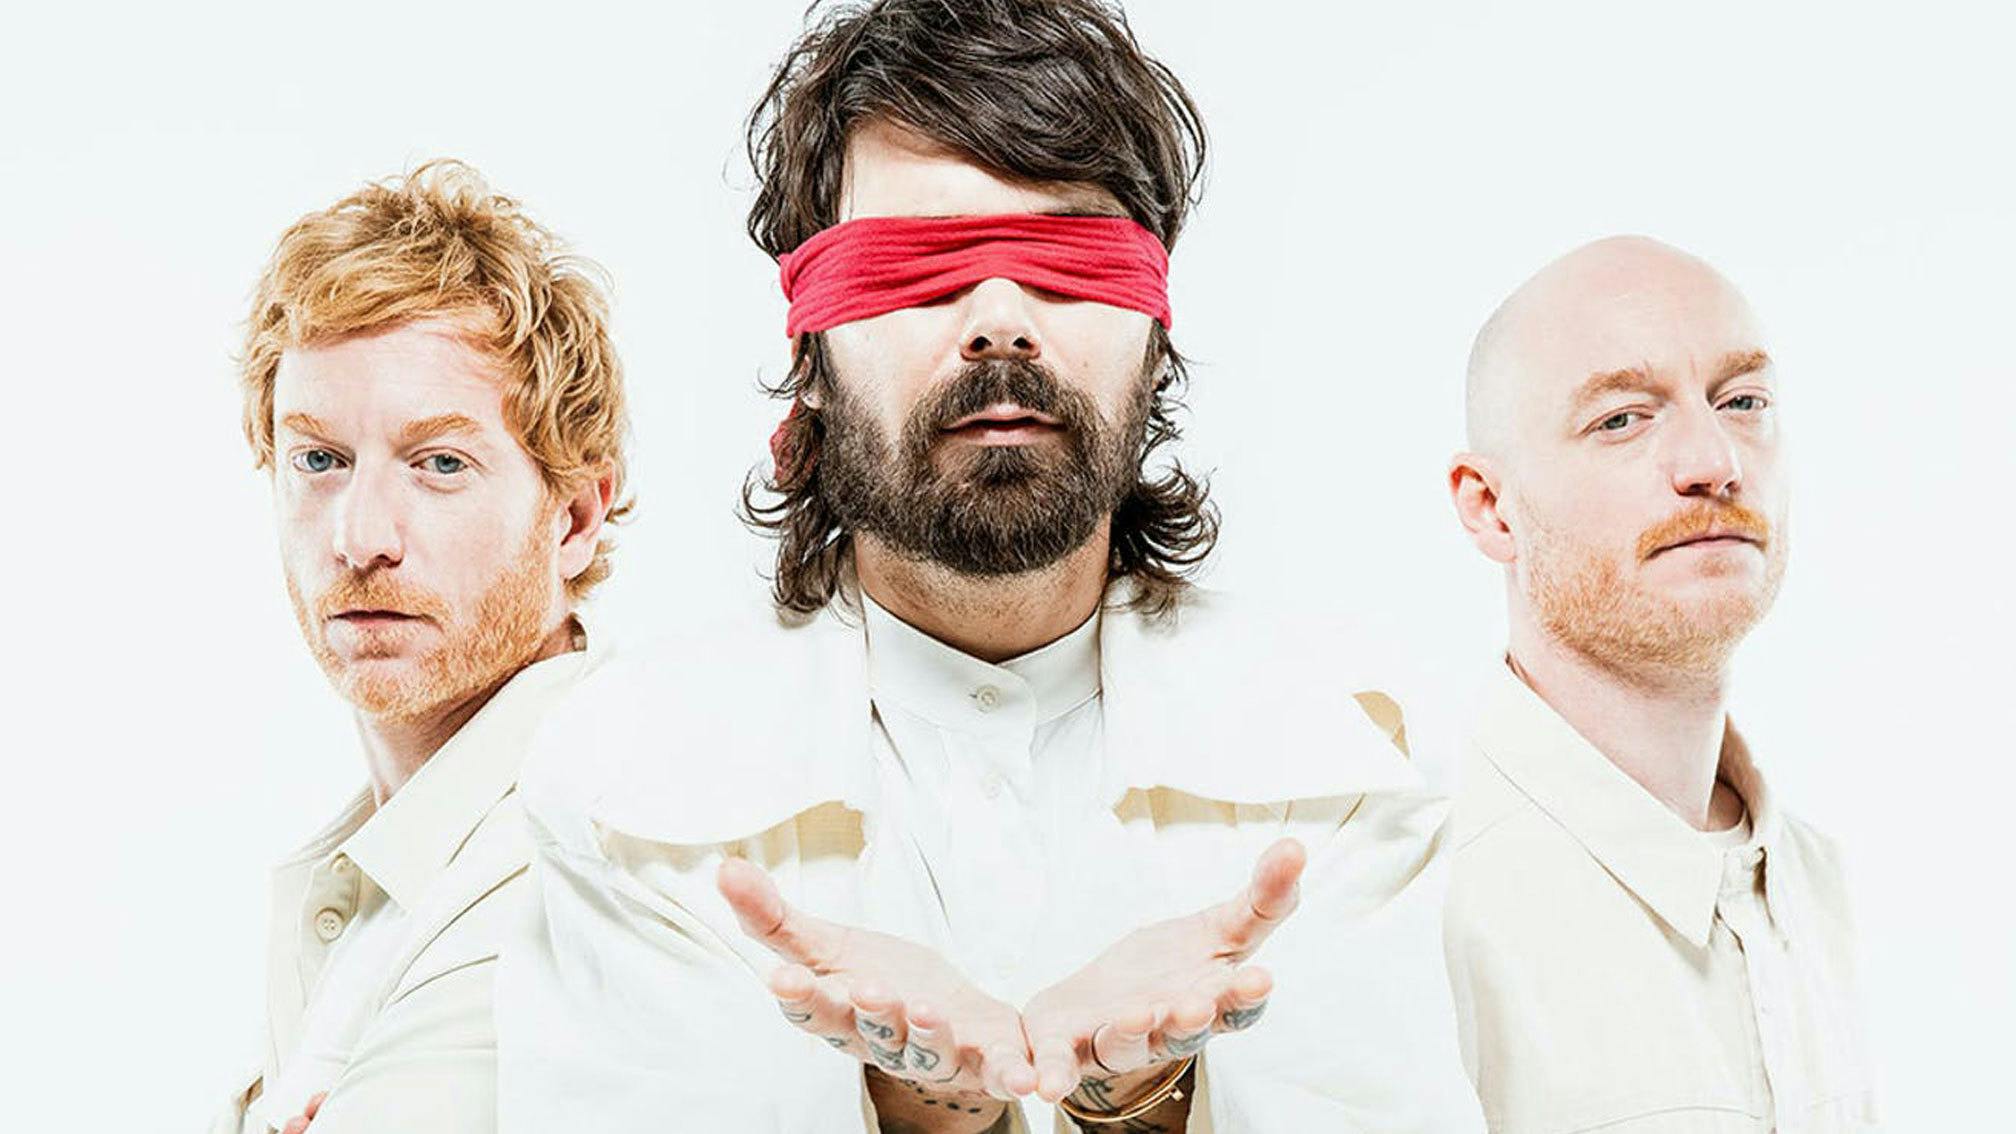 Watch: Biffy Clyro play The Myth Of The Happily Ever After in full